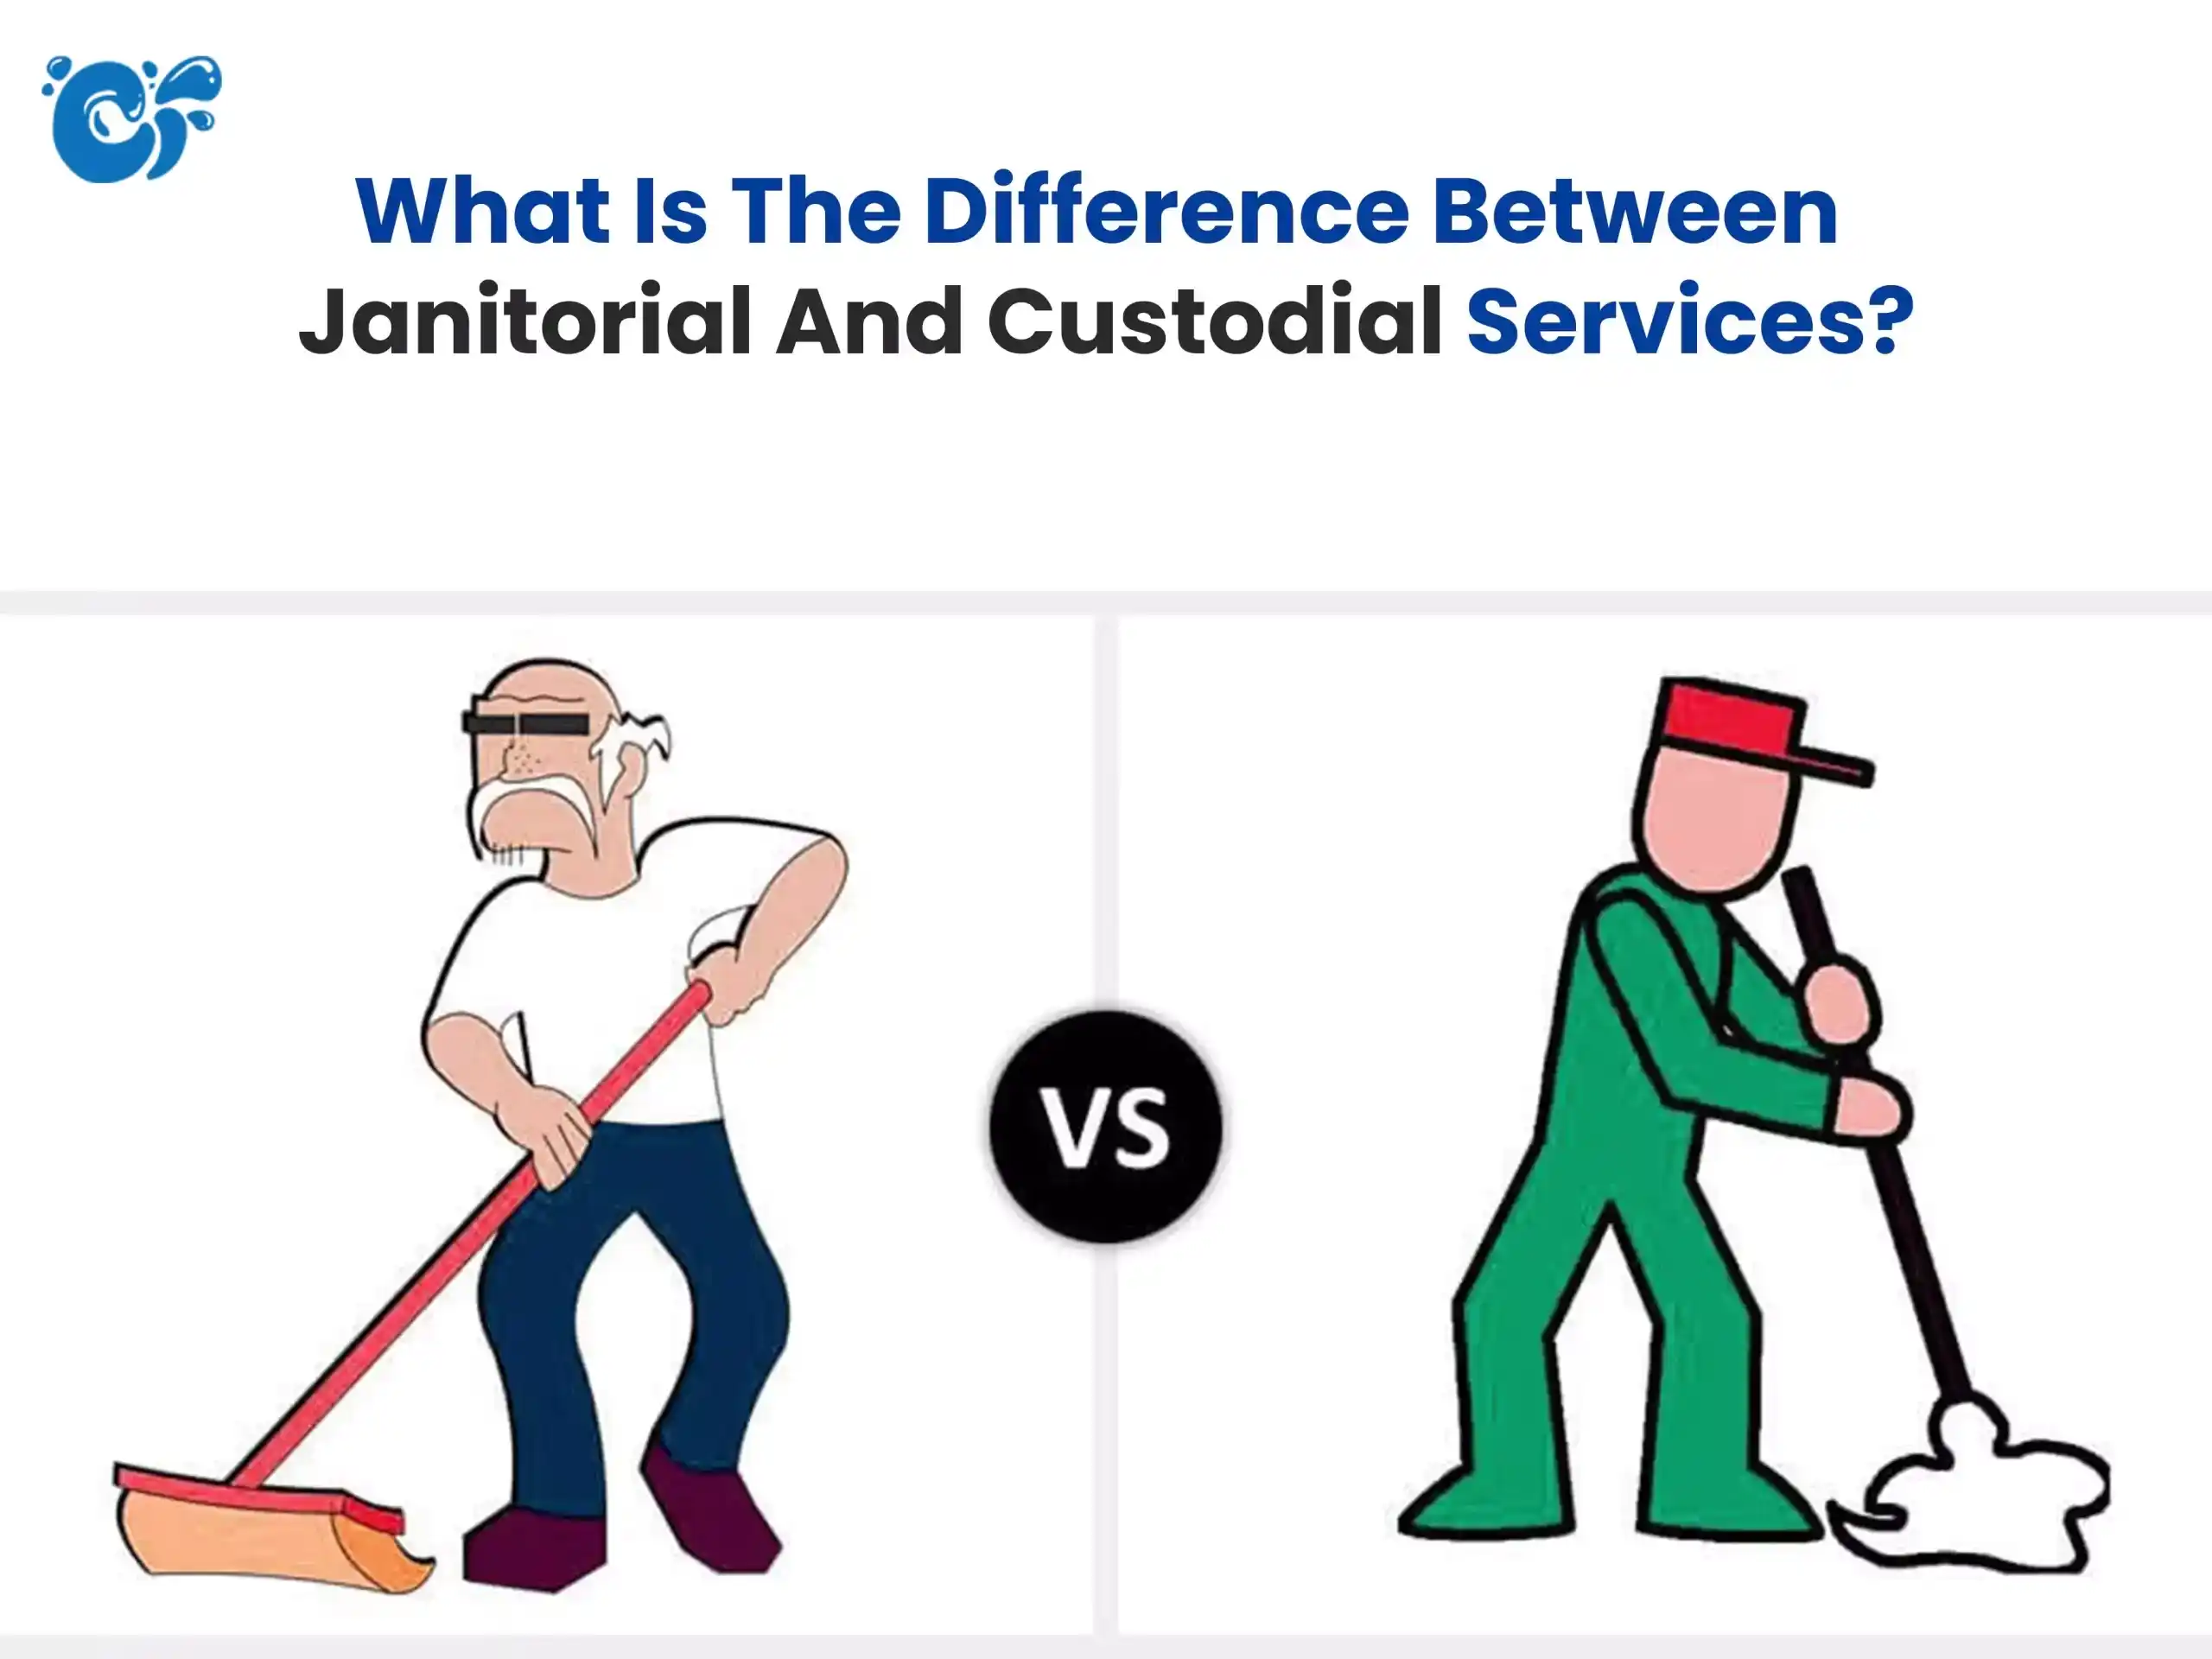 What Is The Difference Between Janitorial And Custodial Services?